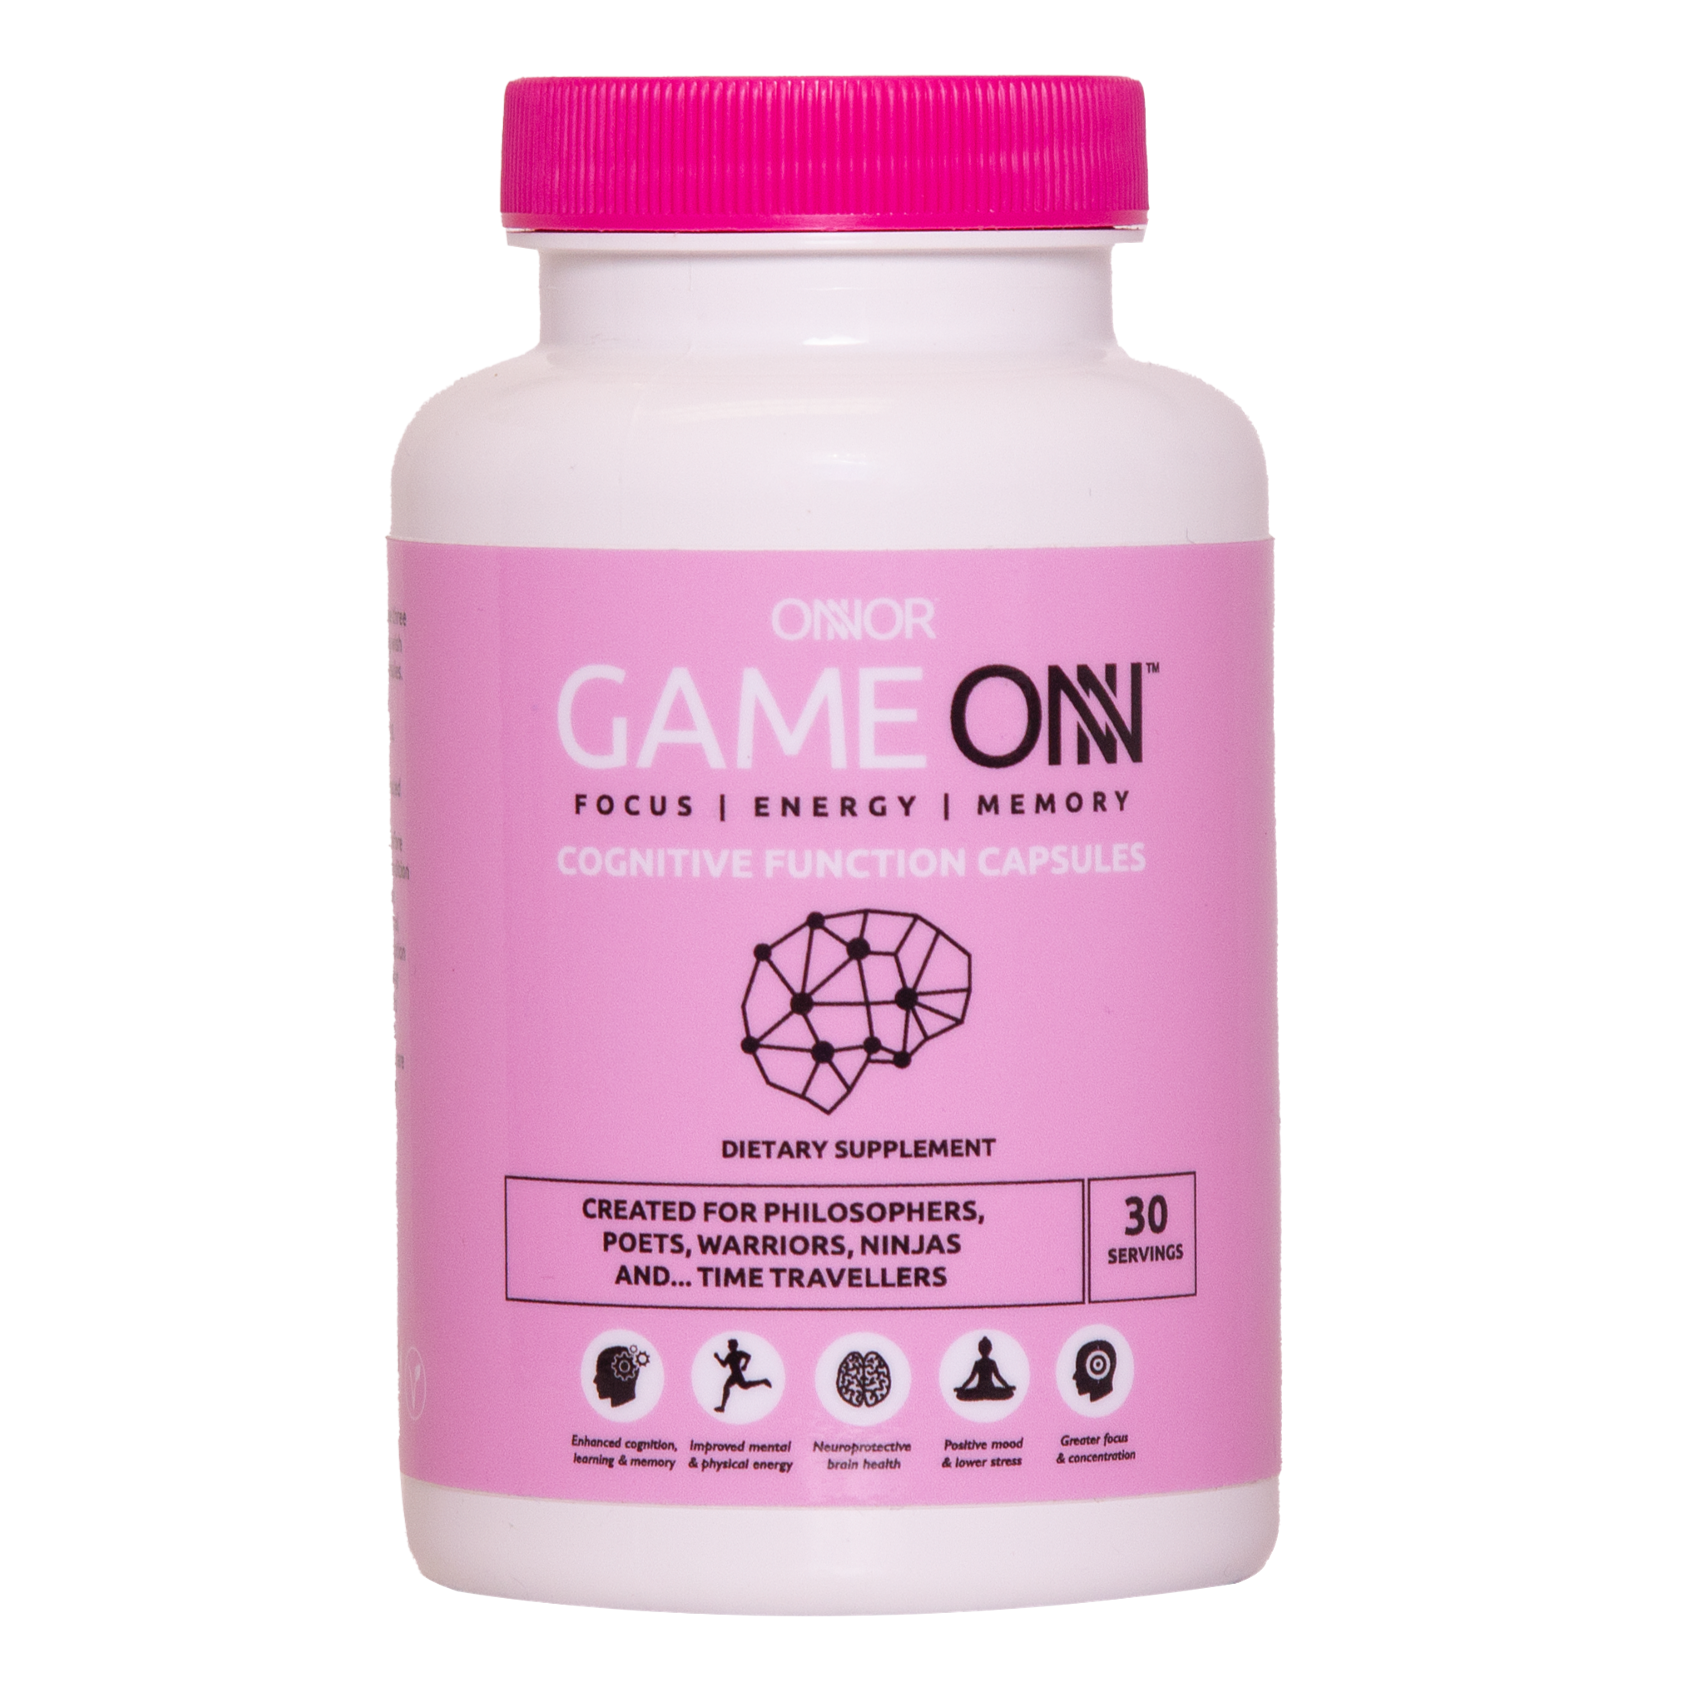 Cognitive Function Capsules – Game ONN Nootropic Capsules – ONNOR PINK Single Pack – 150mg Caffeine Per Serving – For Focus & Energy – ONNOR Limited